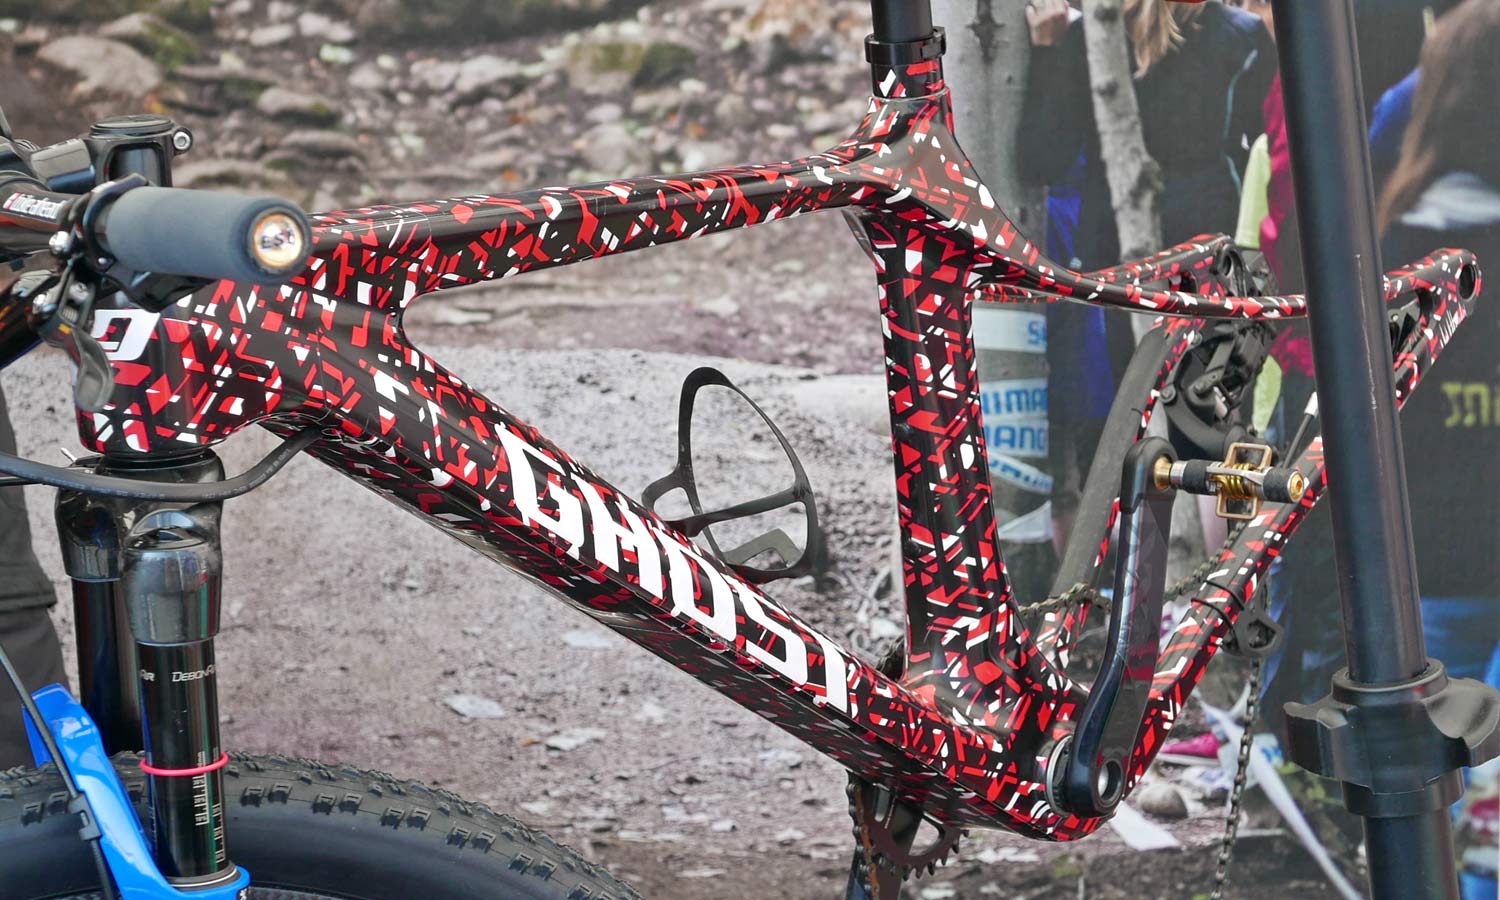 Must See 3D: Ghost carbon bike production in Europe with unbreakable Rein4ced tech